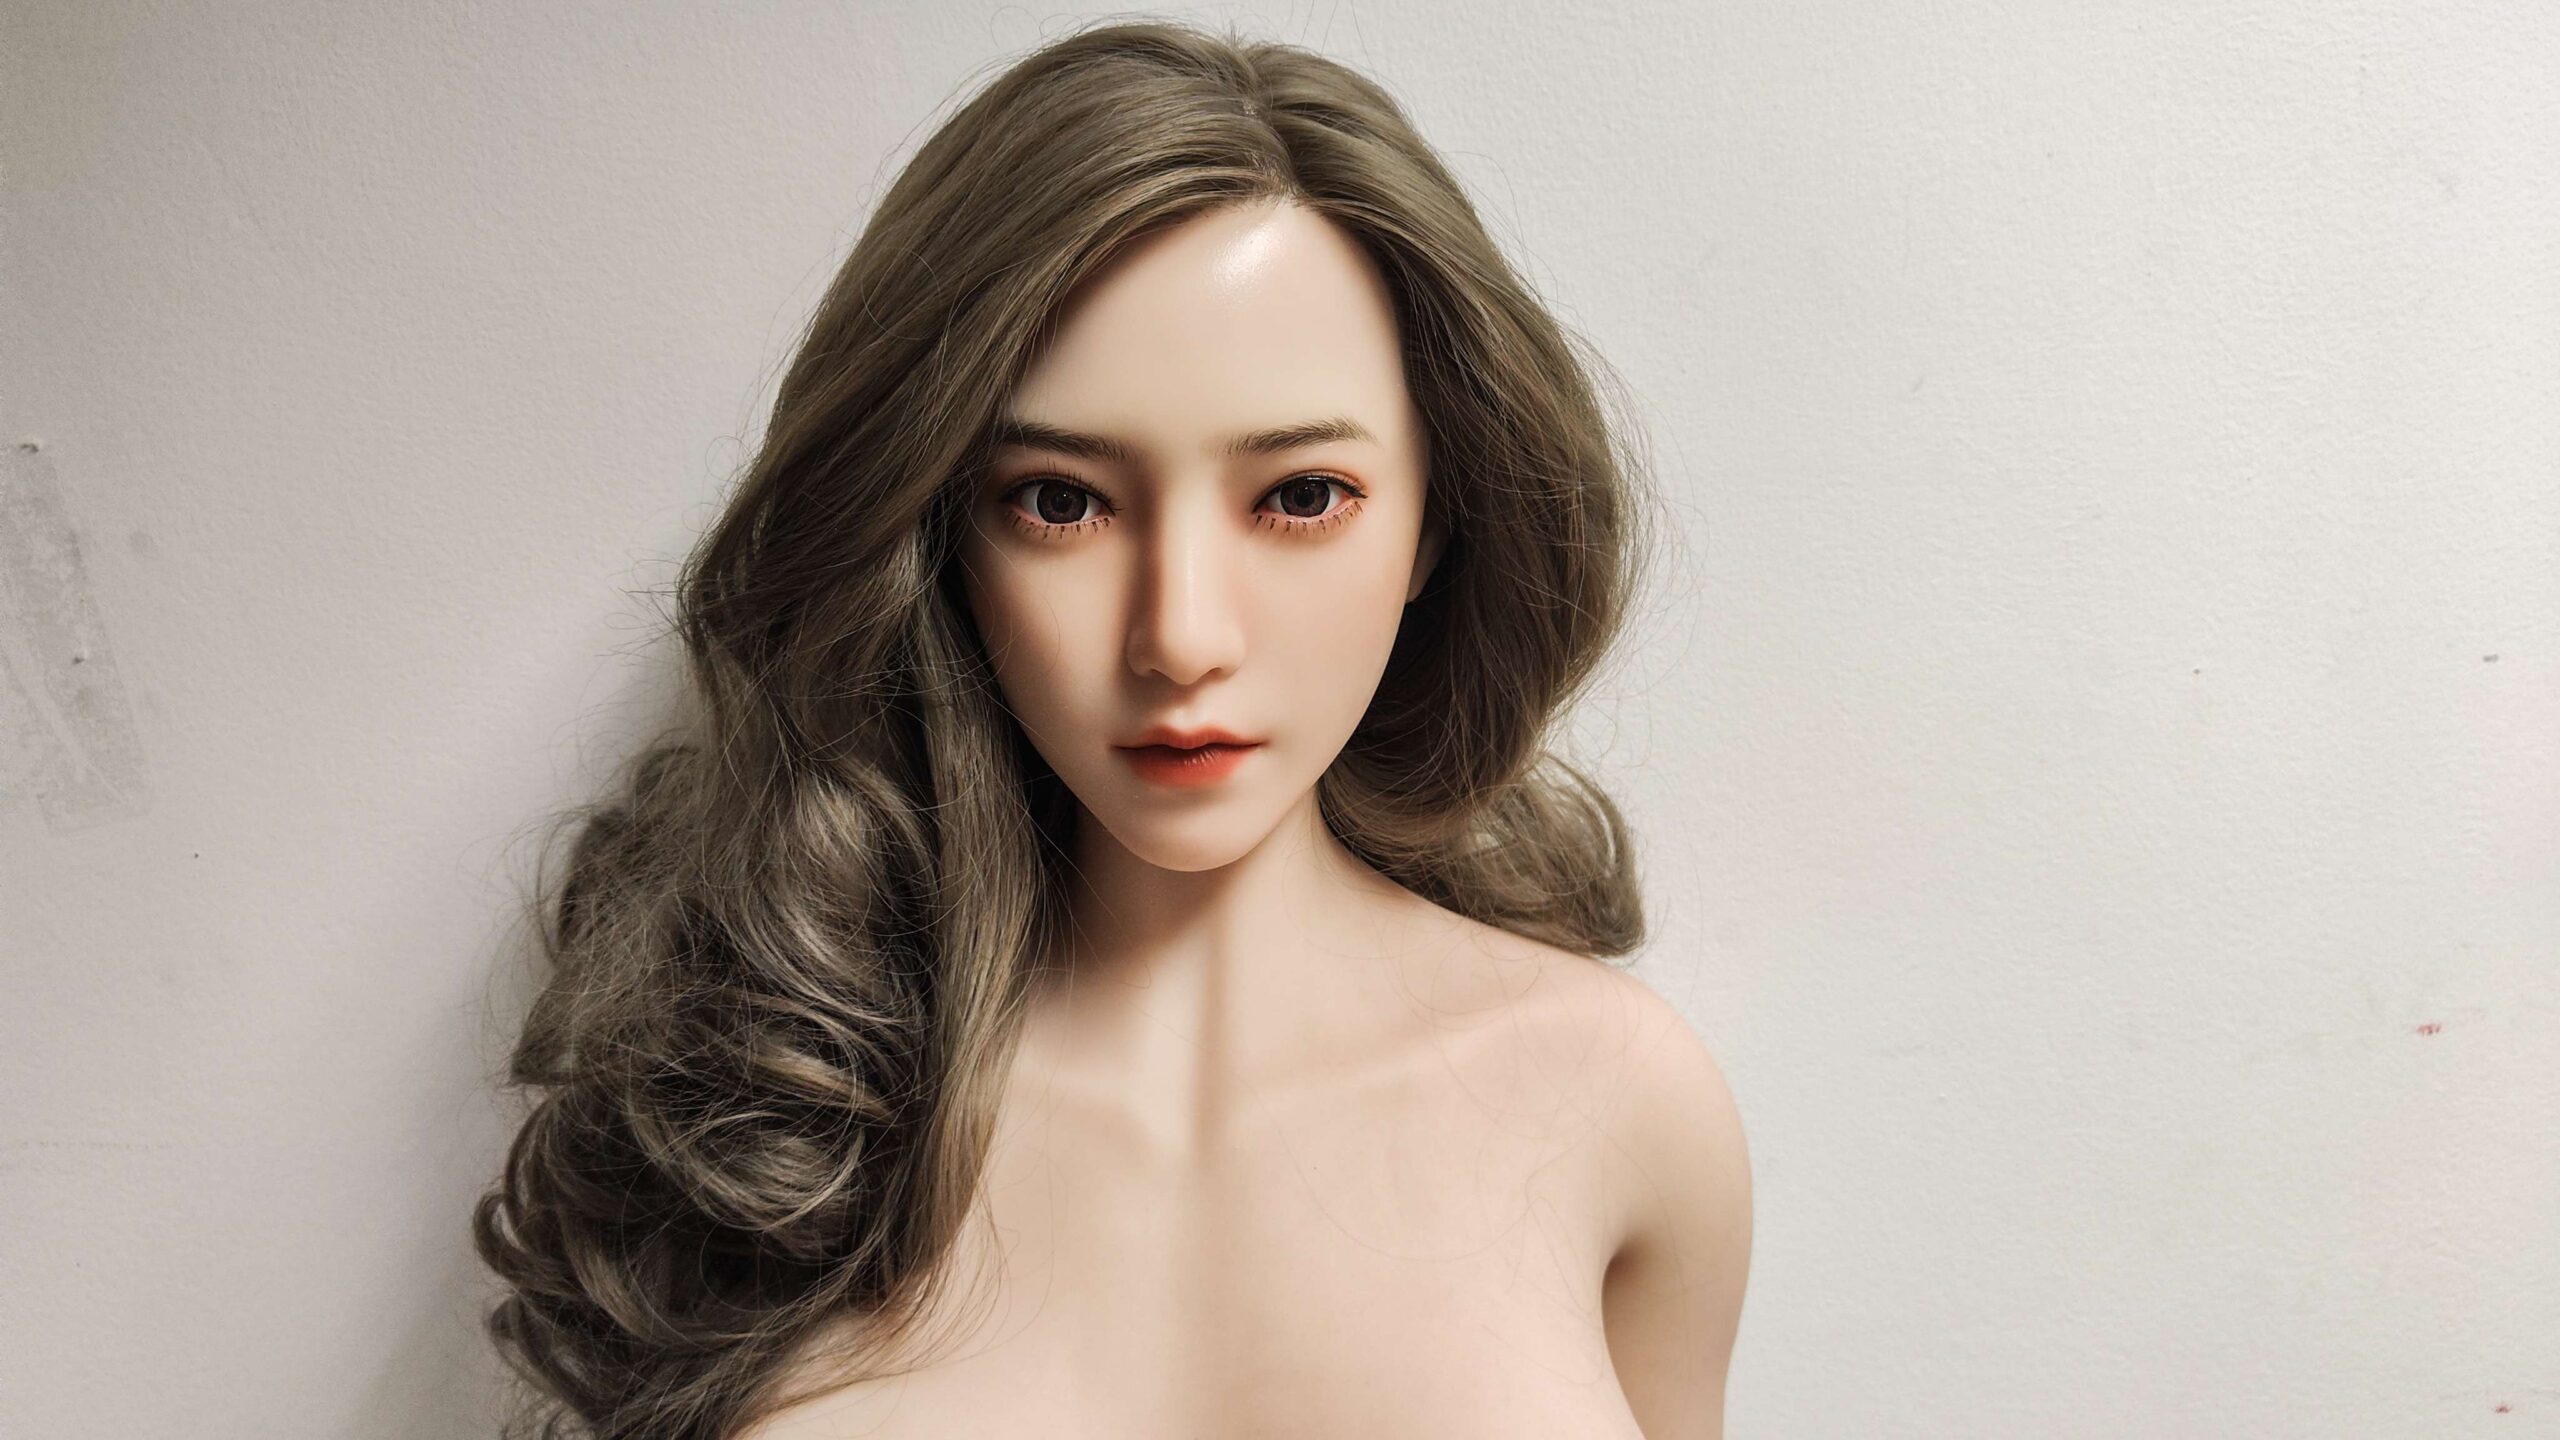 Fantasies you can try with your small breast sex doll